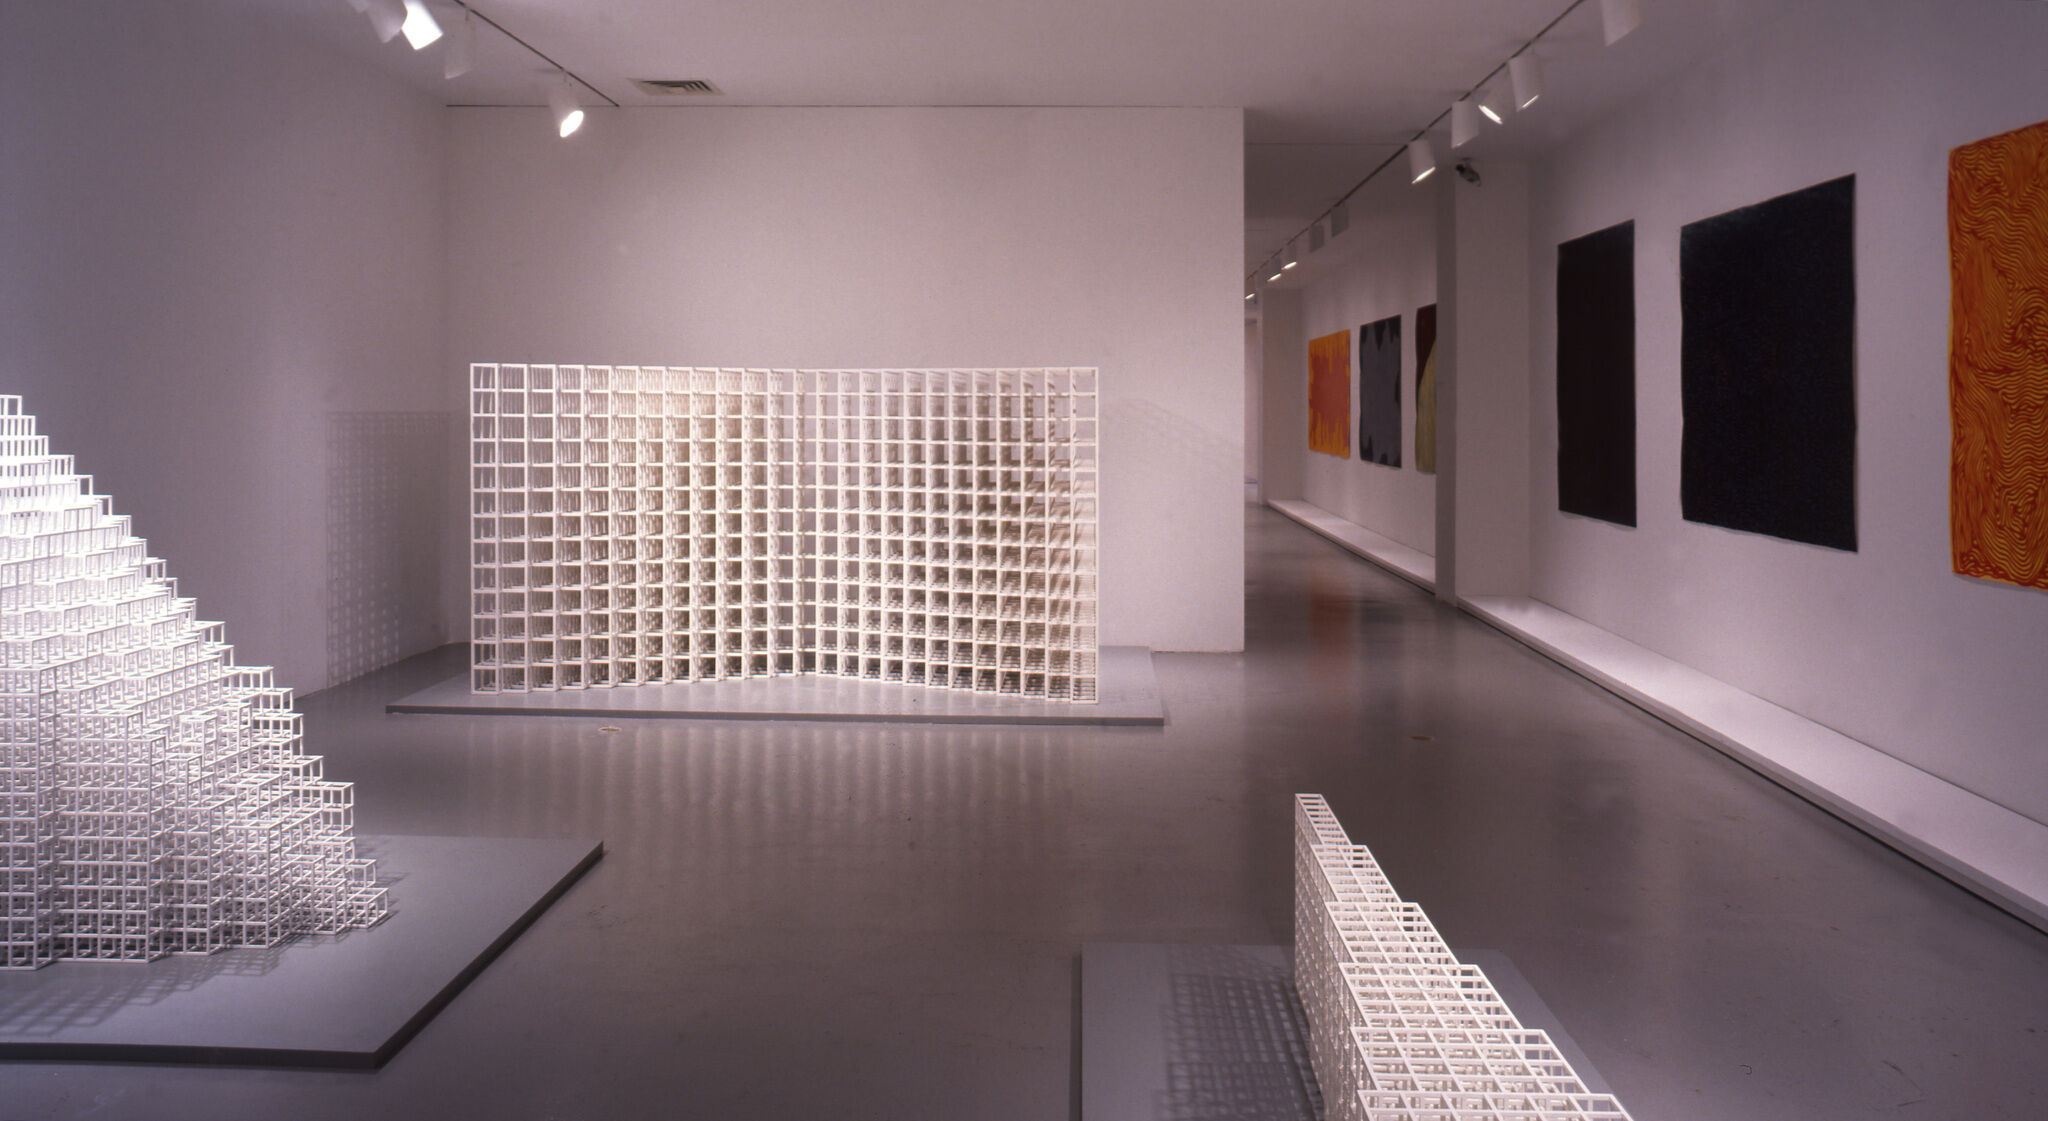 White sculptures made out of grids, along with abstract paintings displayed in a gallery.